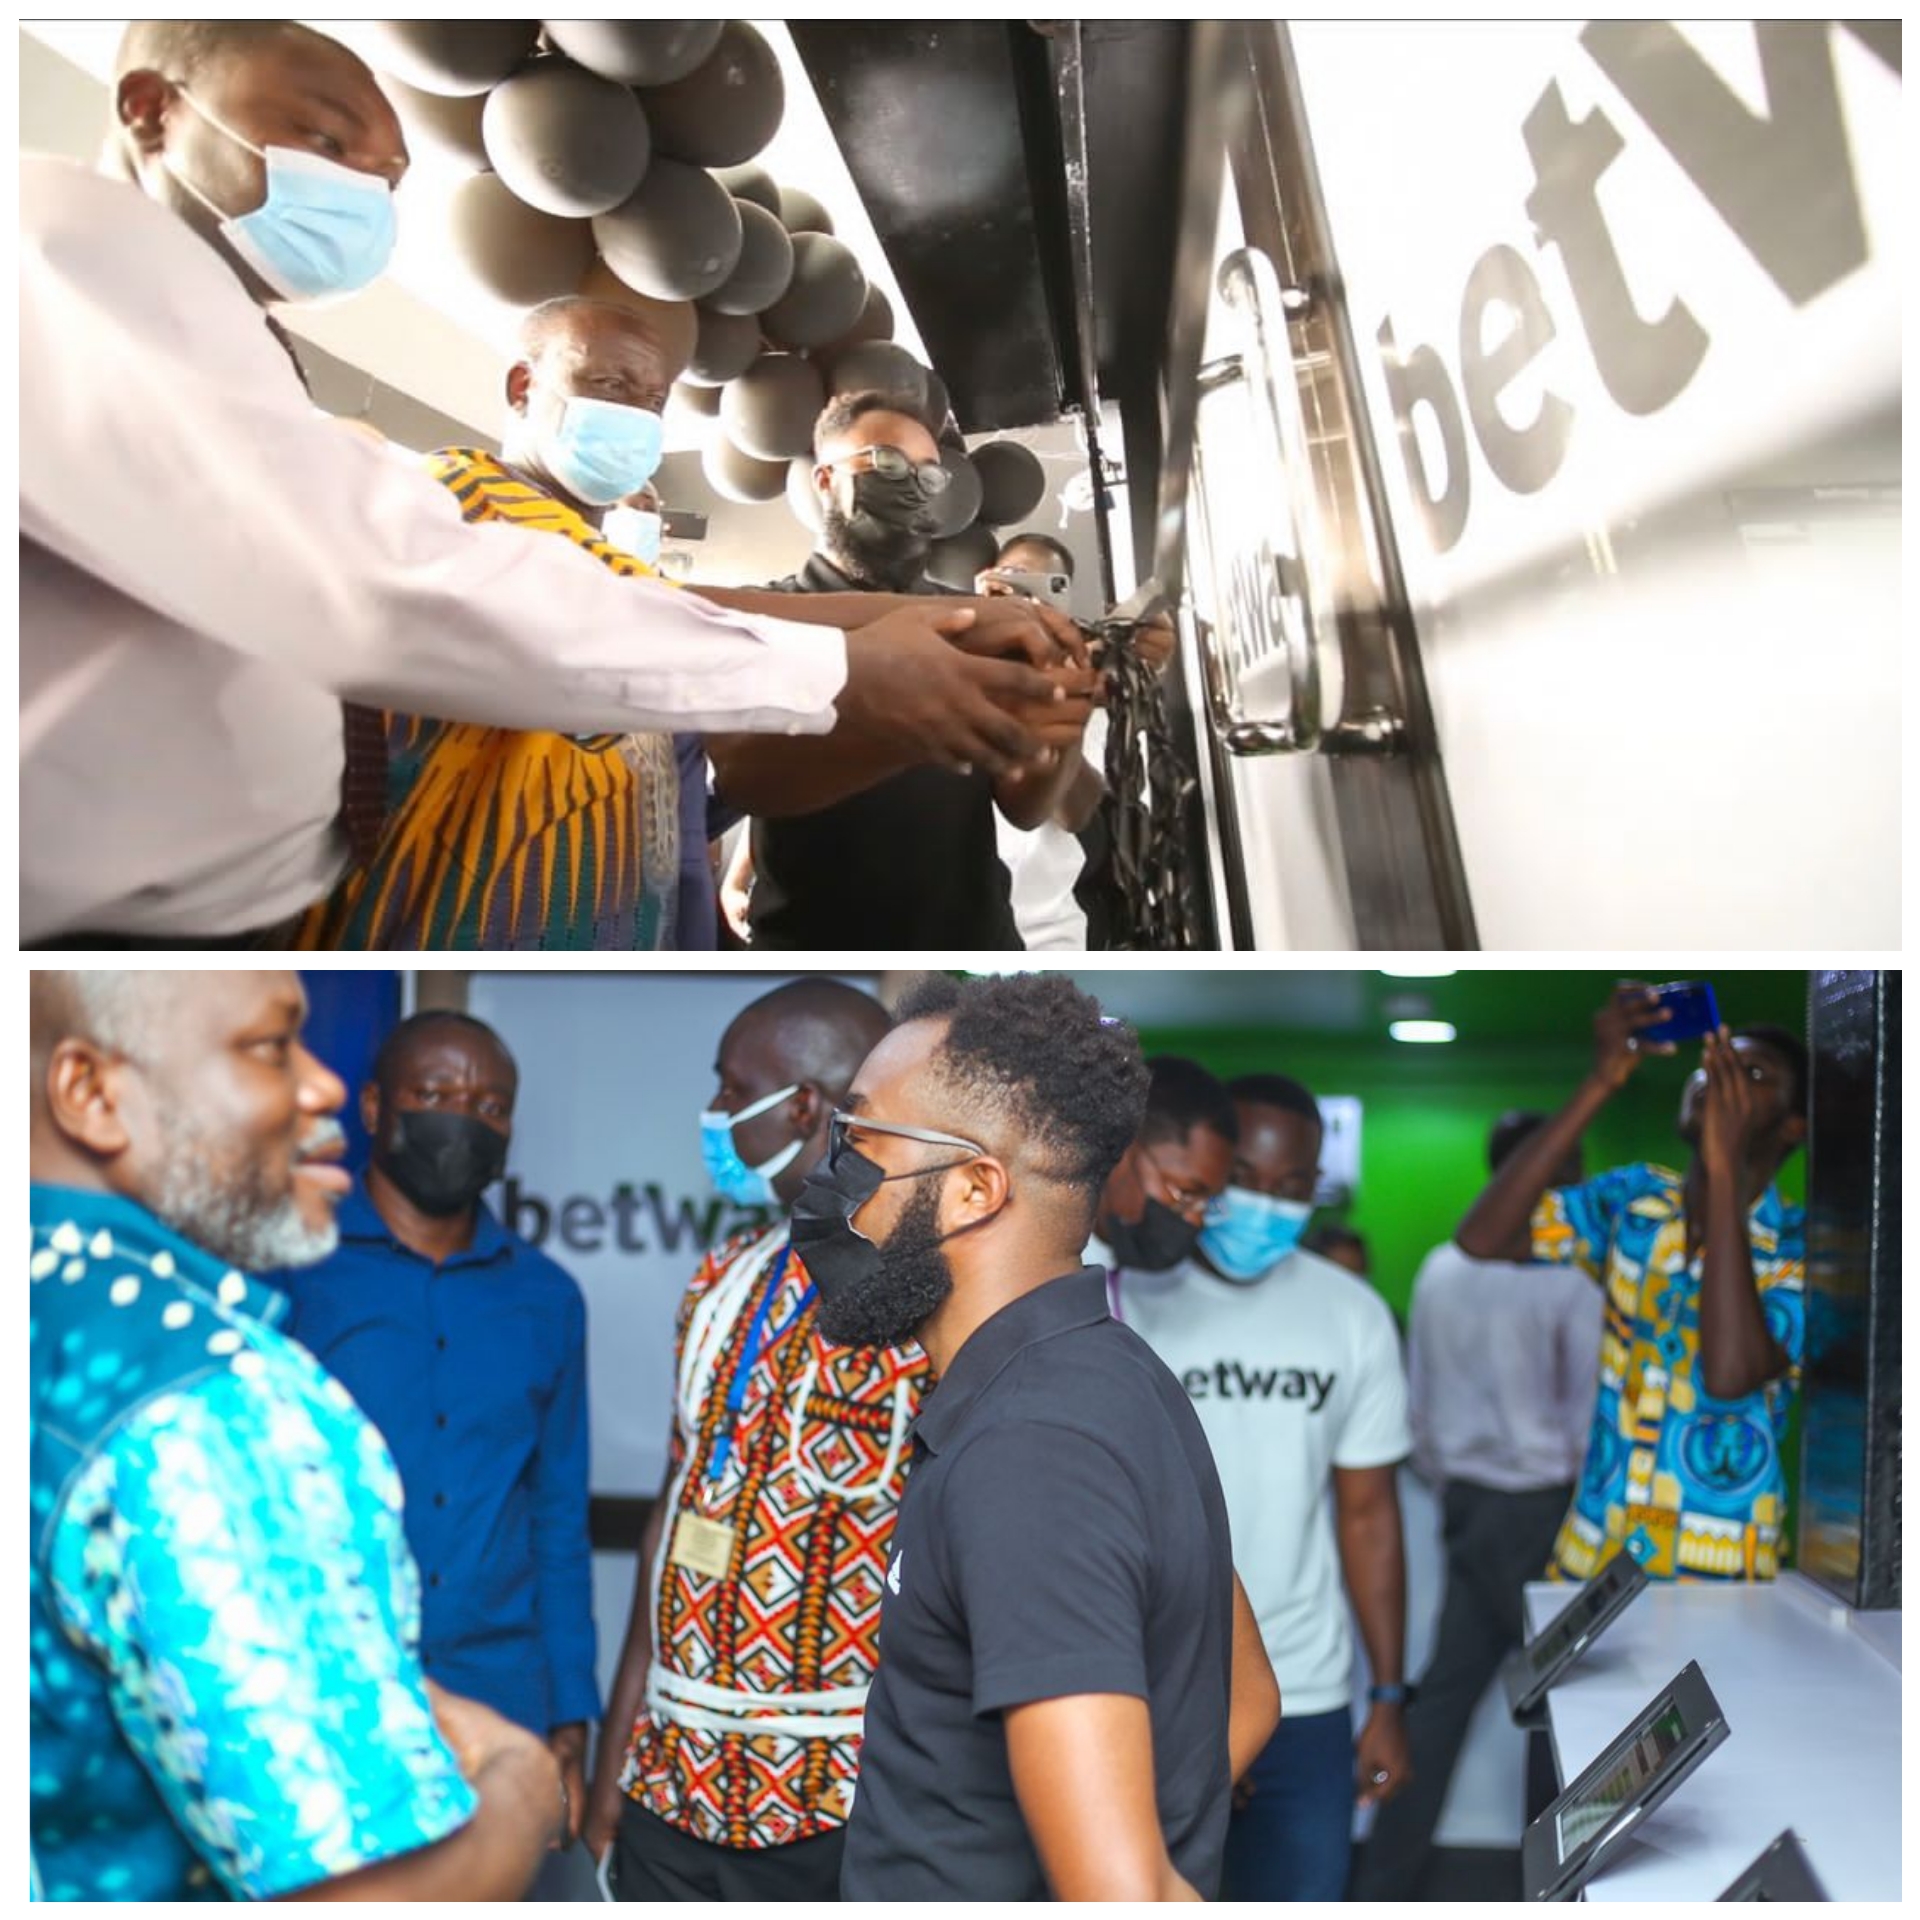  Betway opens new customer experience centre in Takoradi